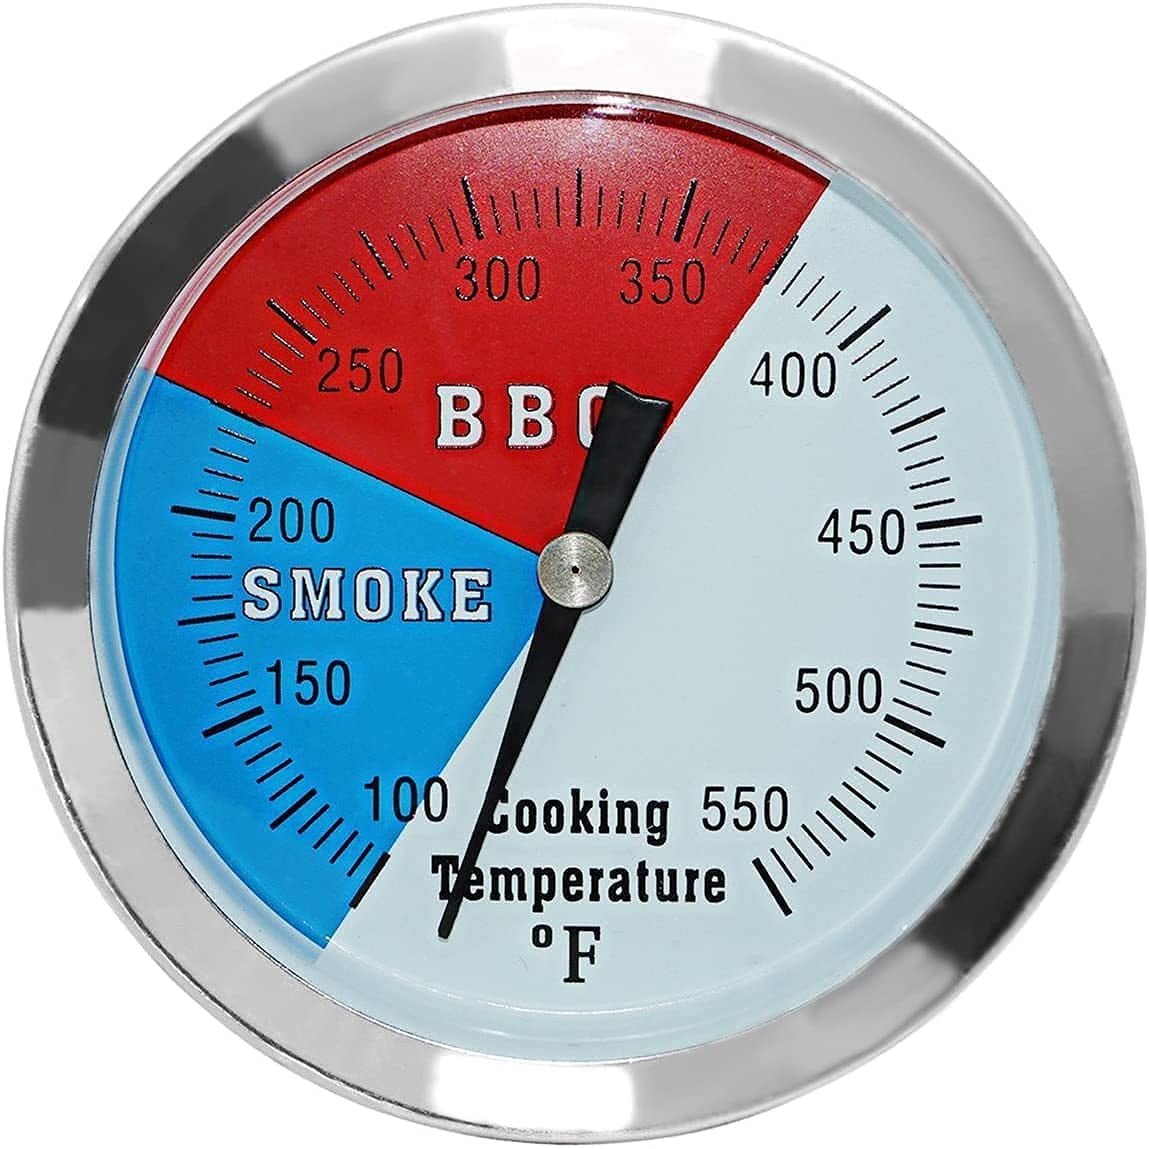 BBQ Smoker Grill Stainless Steel Thermometer Temperature Gauge 60℃-427℃ Z6M6 